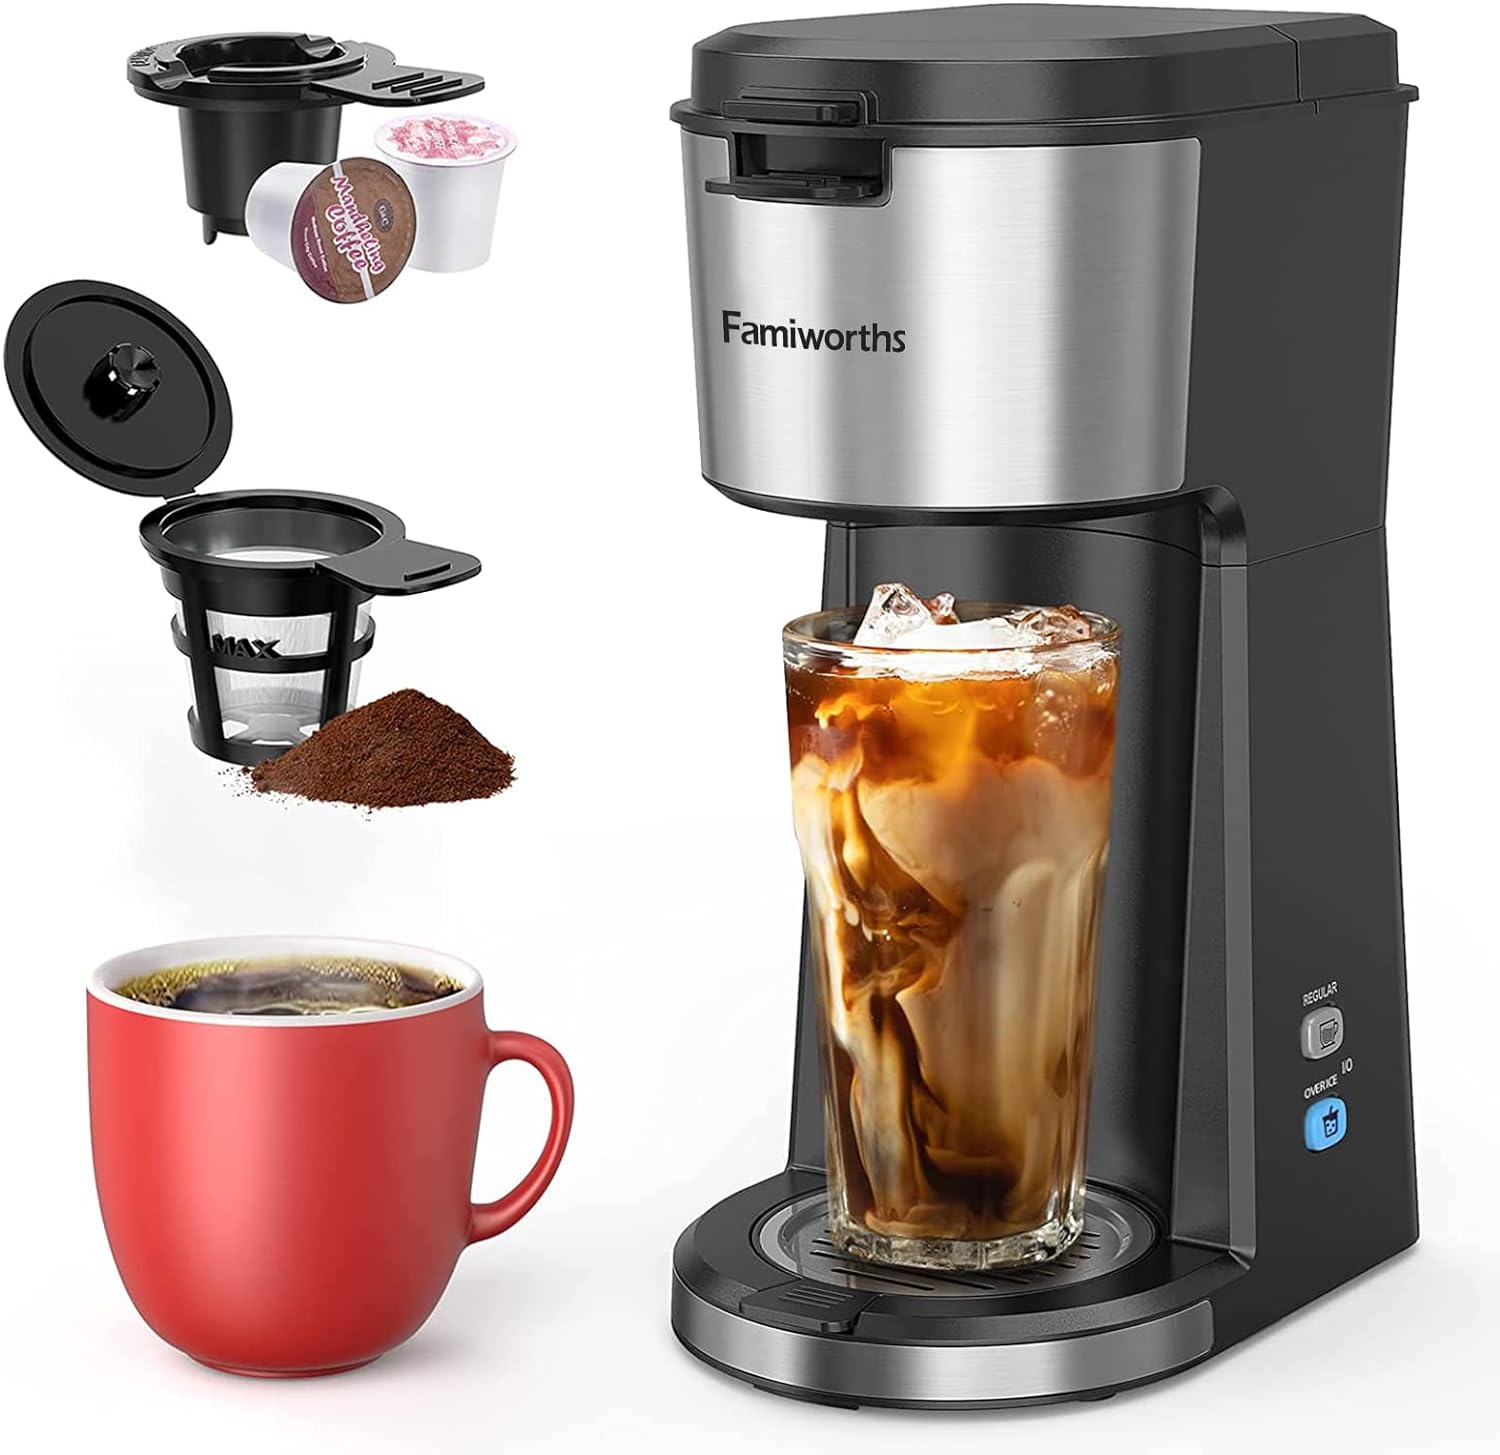 Famiworths Iced Coffee Maker Review